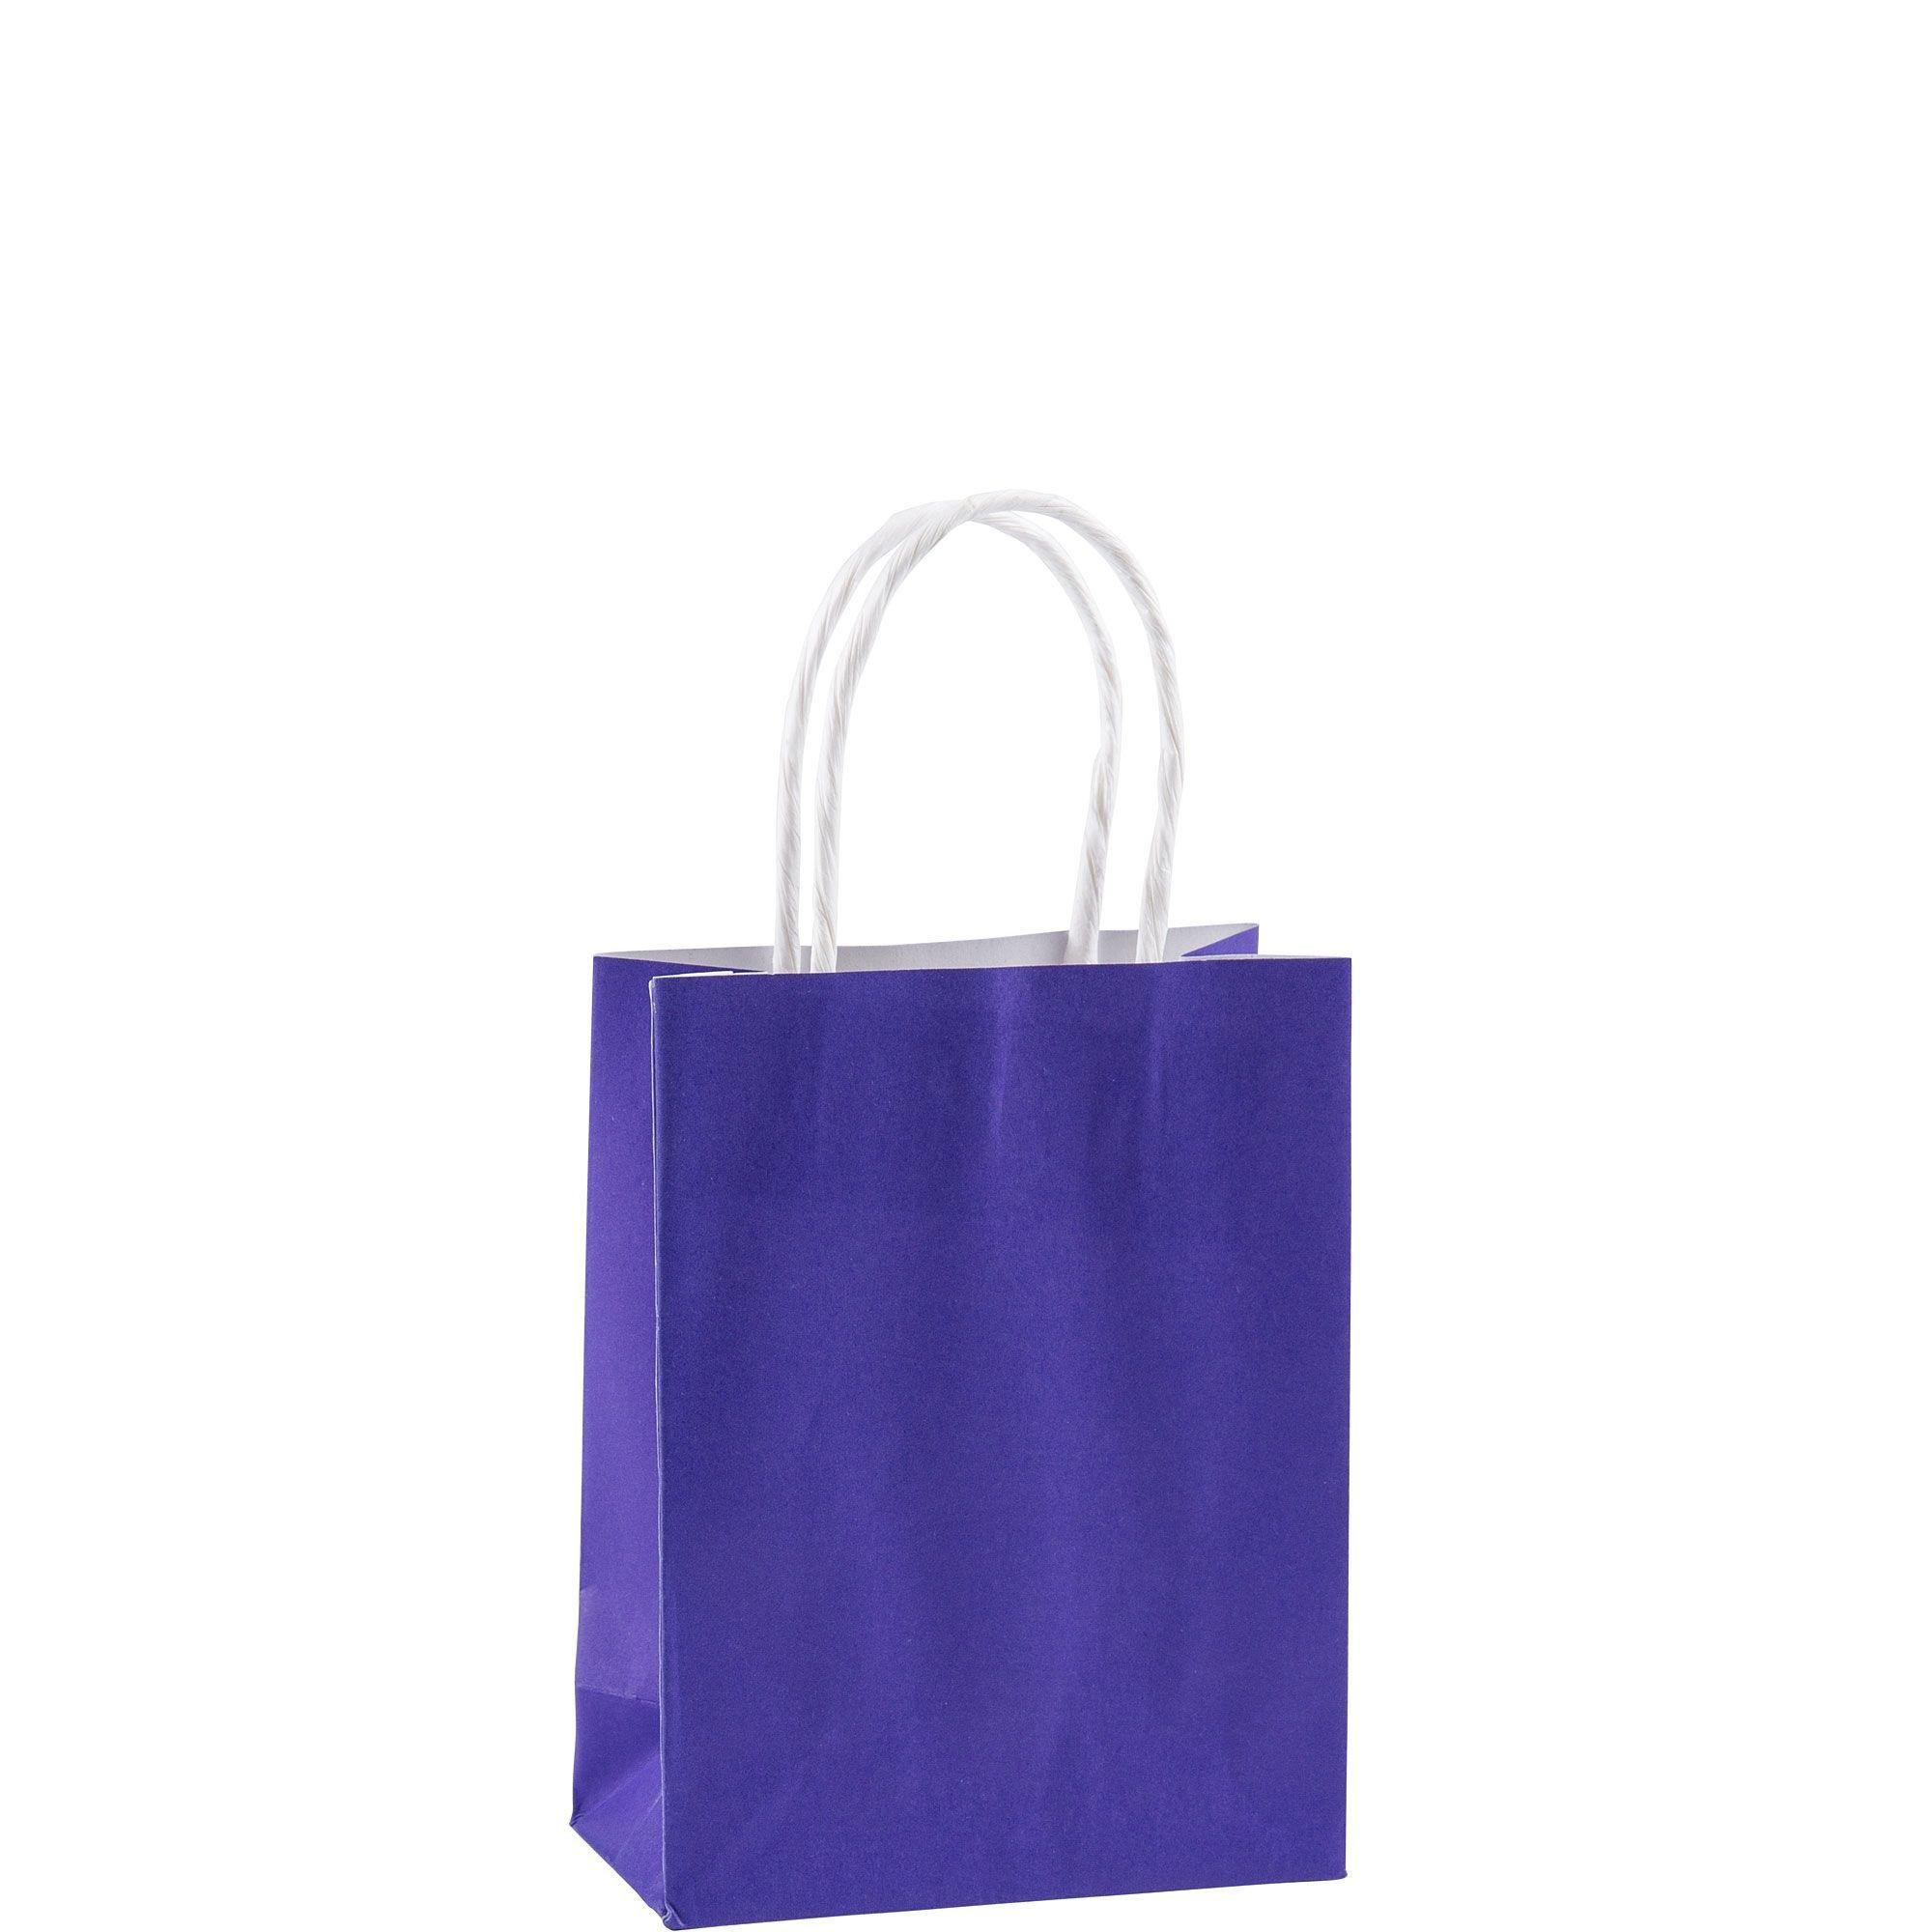 DjinnGlory 60 Pack Tiny Mini Small Purple Paper Gift Bags with Handles 6.3  x 4.7 x 2.75 Inch for Birthday Wedding Baby Shower Party Favors Goodies